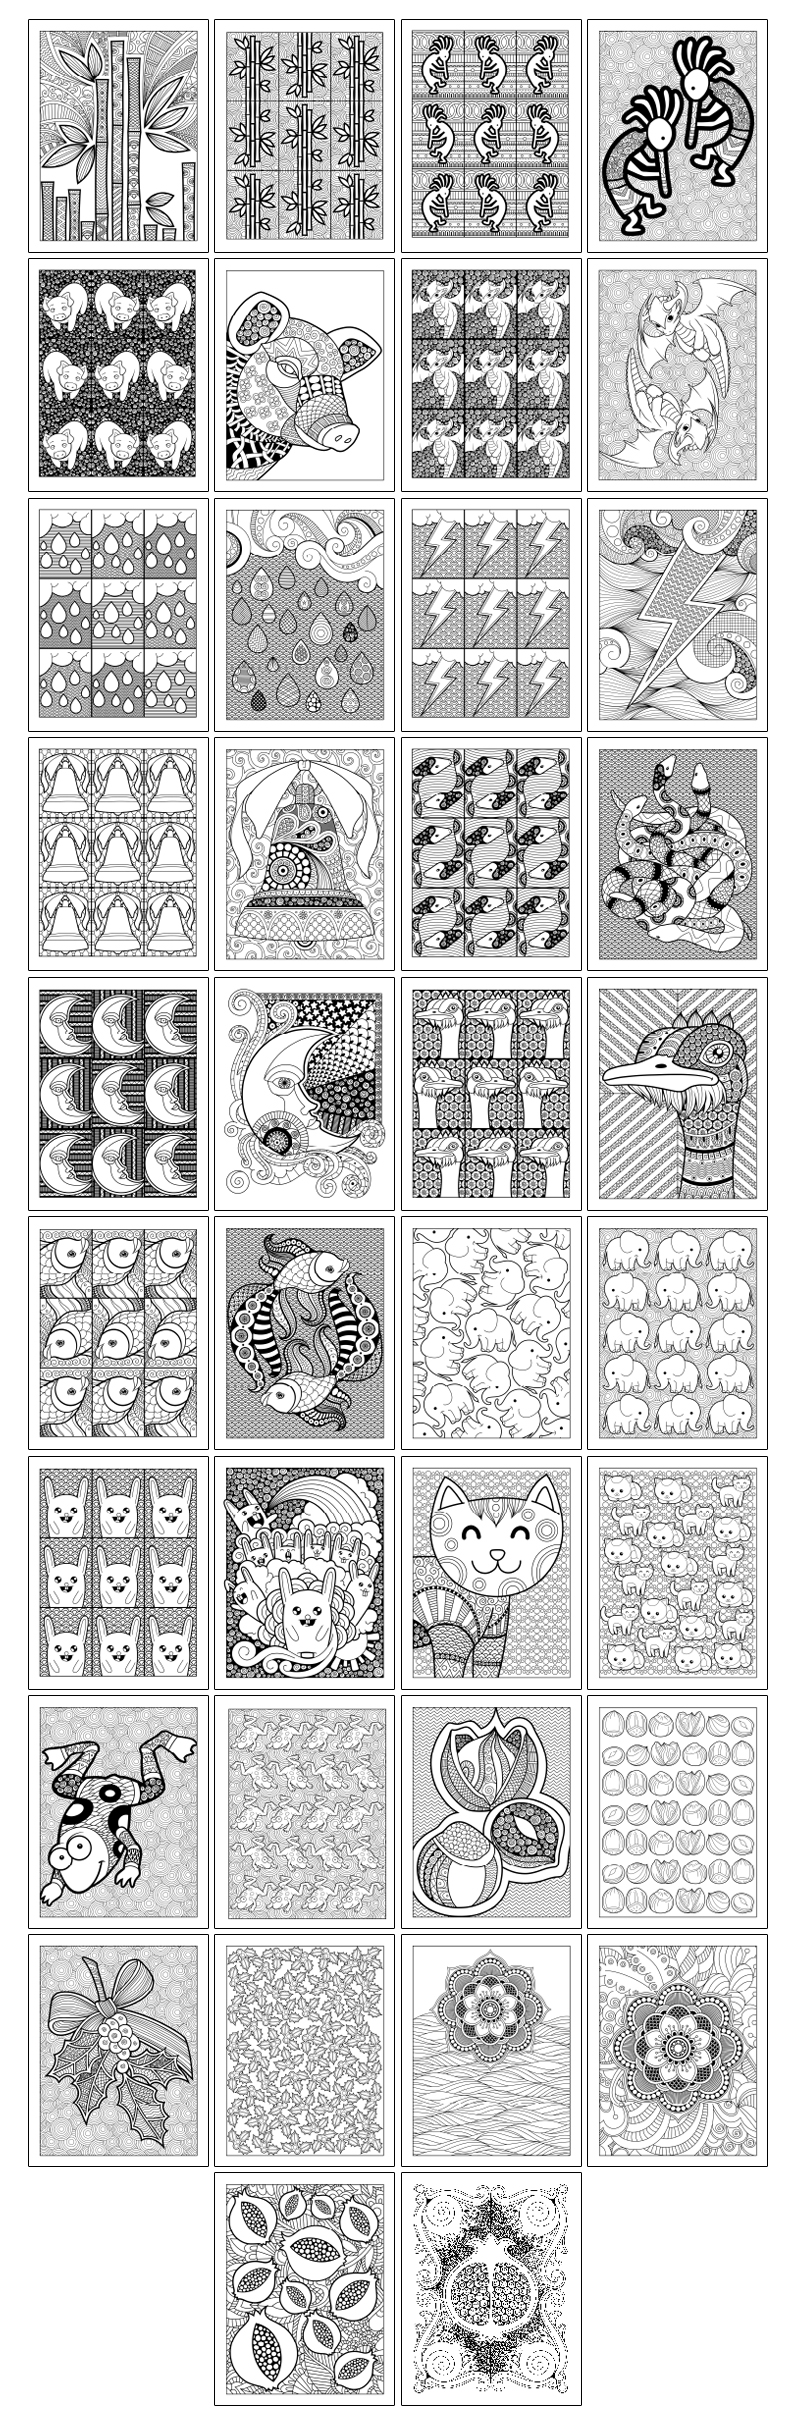 a complete image showing smaller images of all the coloring pages in a package about fertility charms